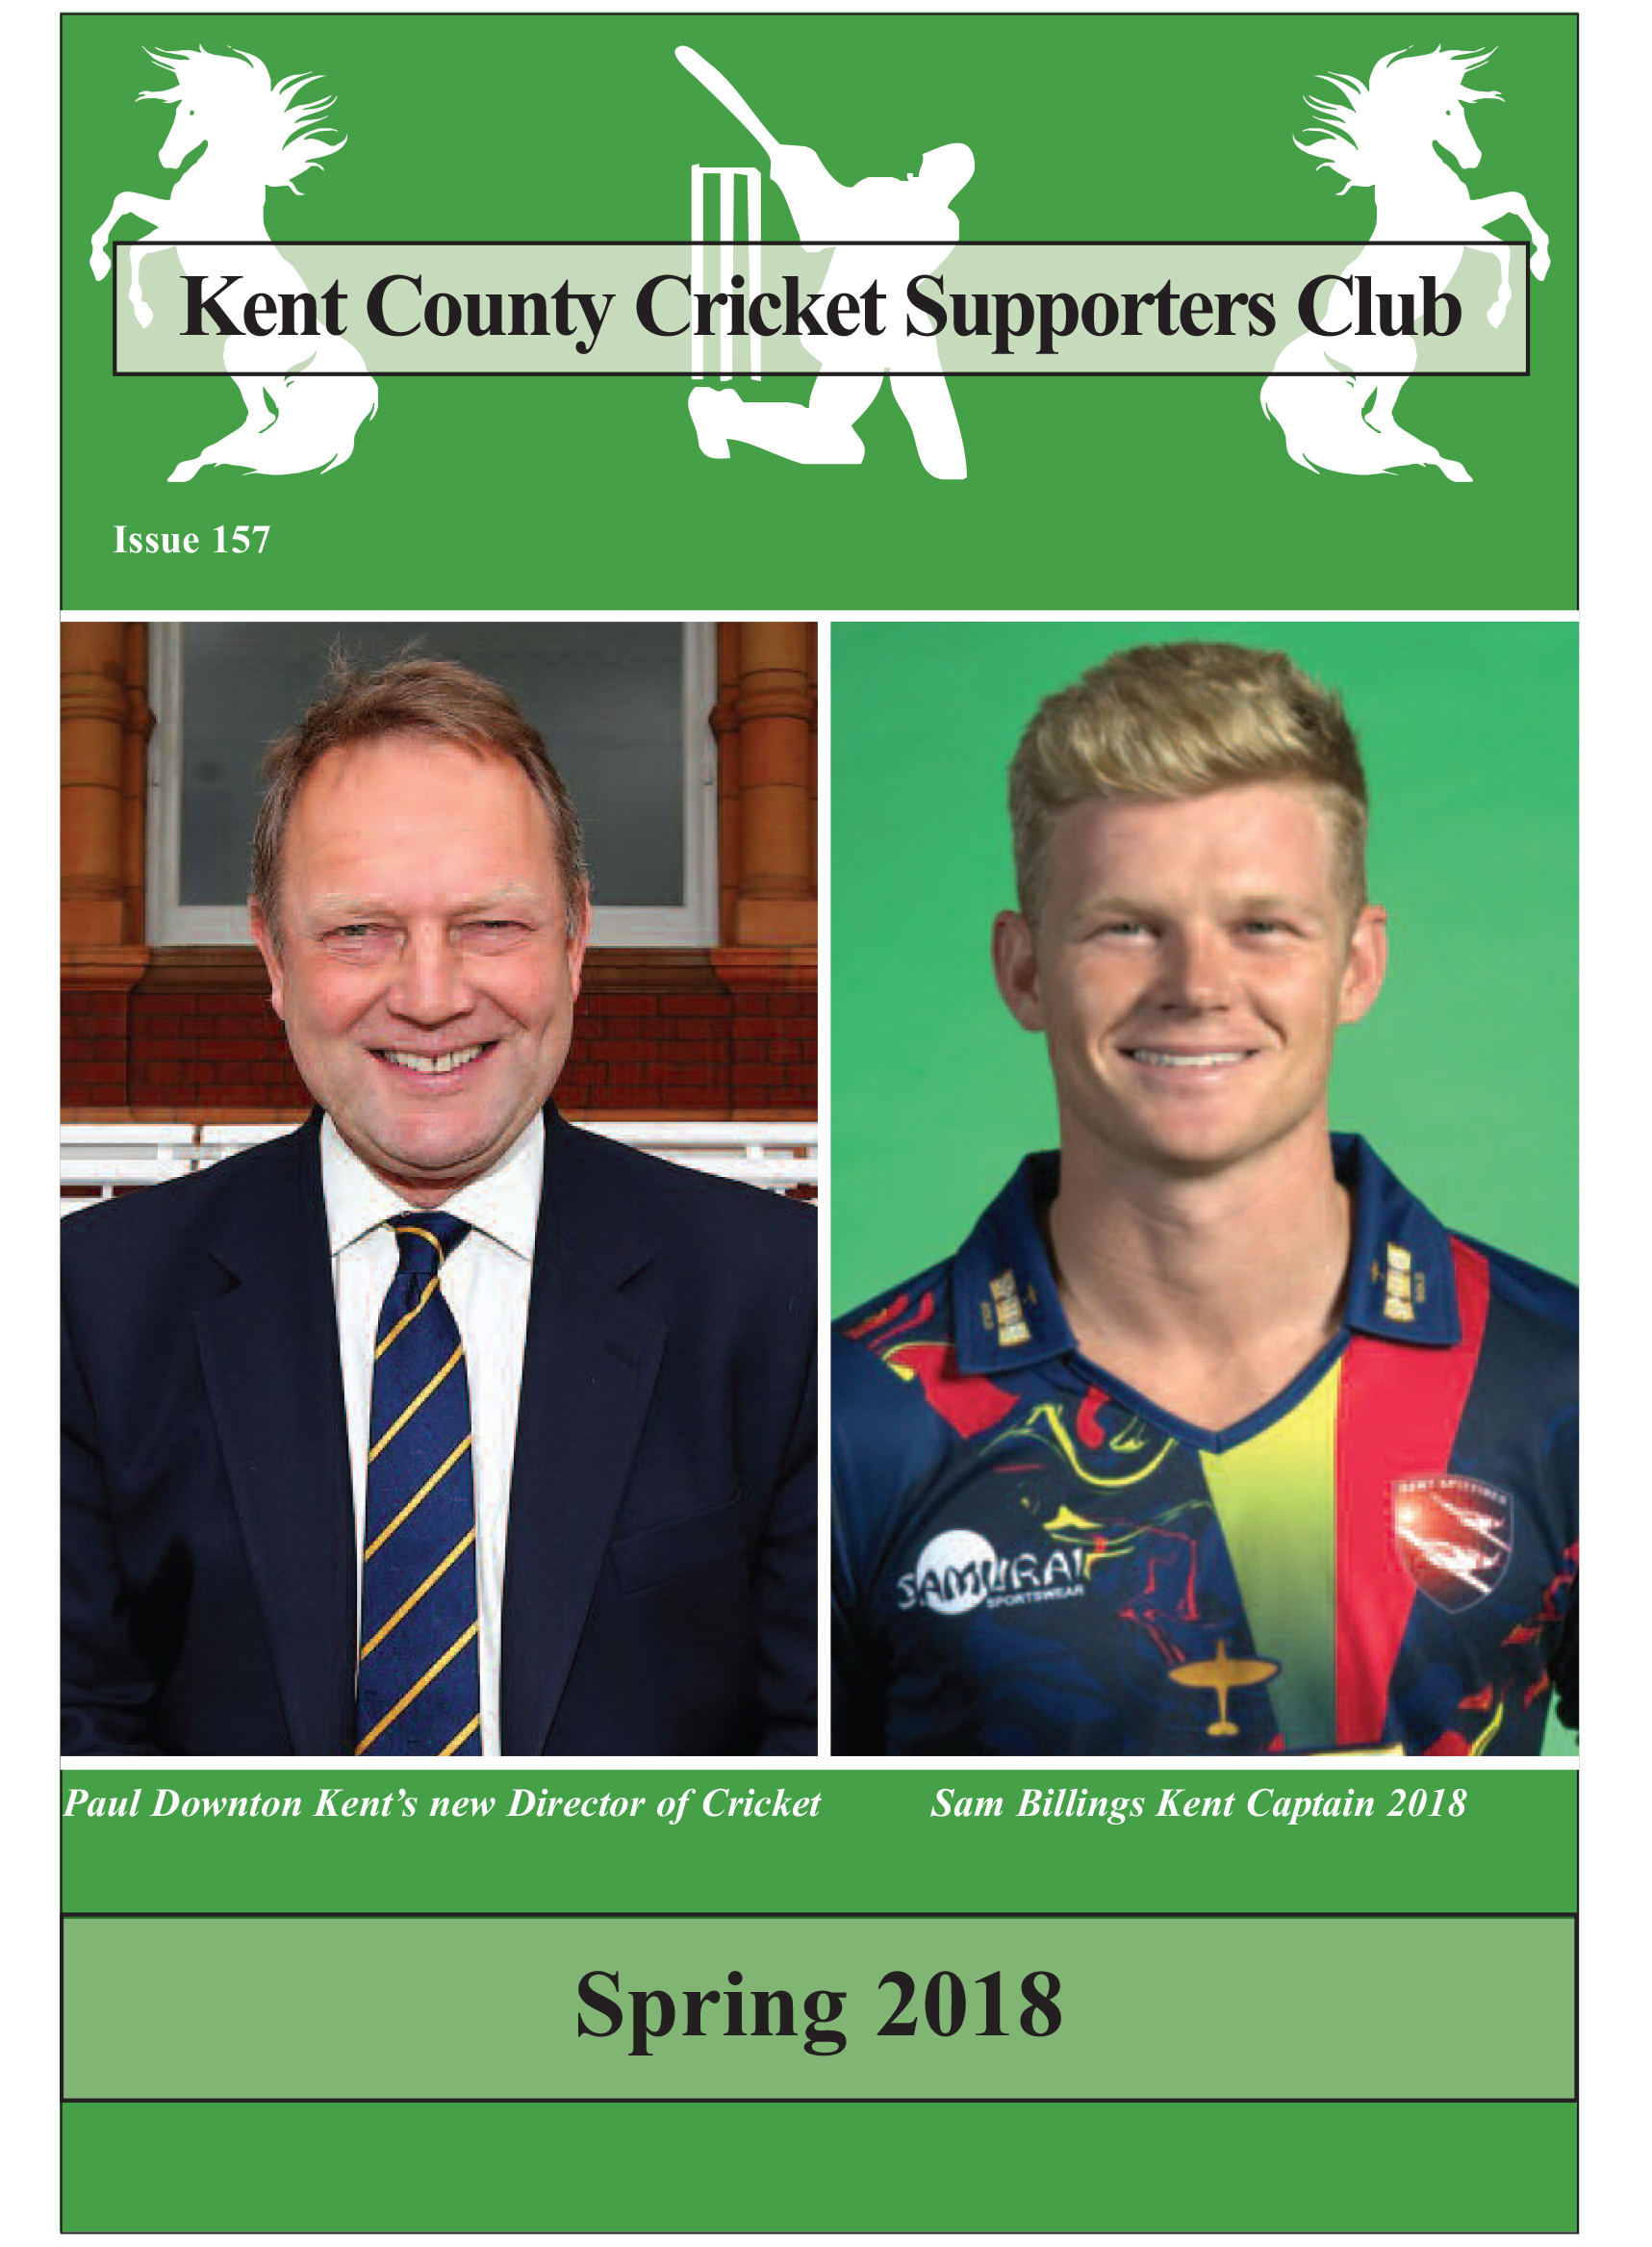 KCCSC Magazine Cover